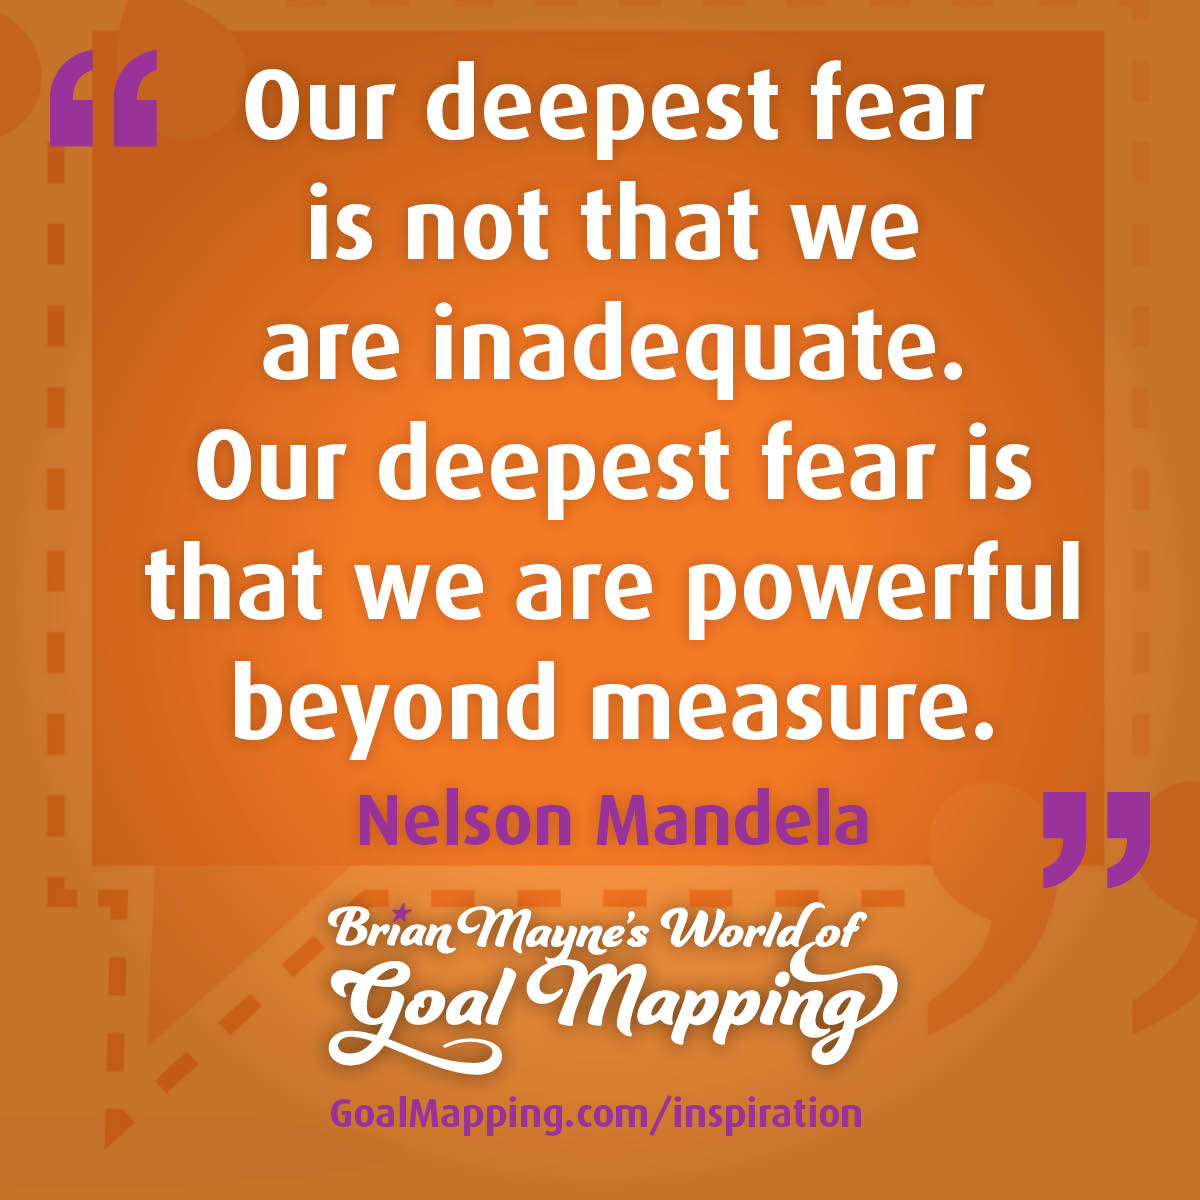 "Our deepest fear is not that we are inadequate. Our deepest fear is that we are powerful beyond measure." Nelson Mandela